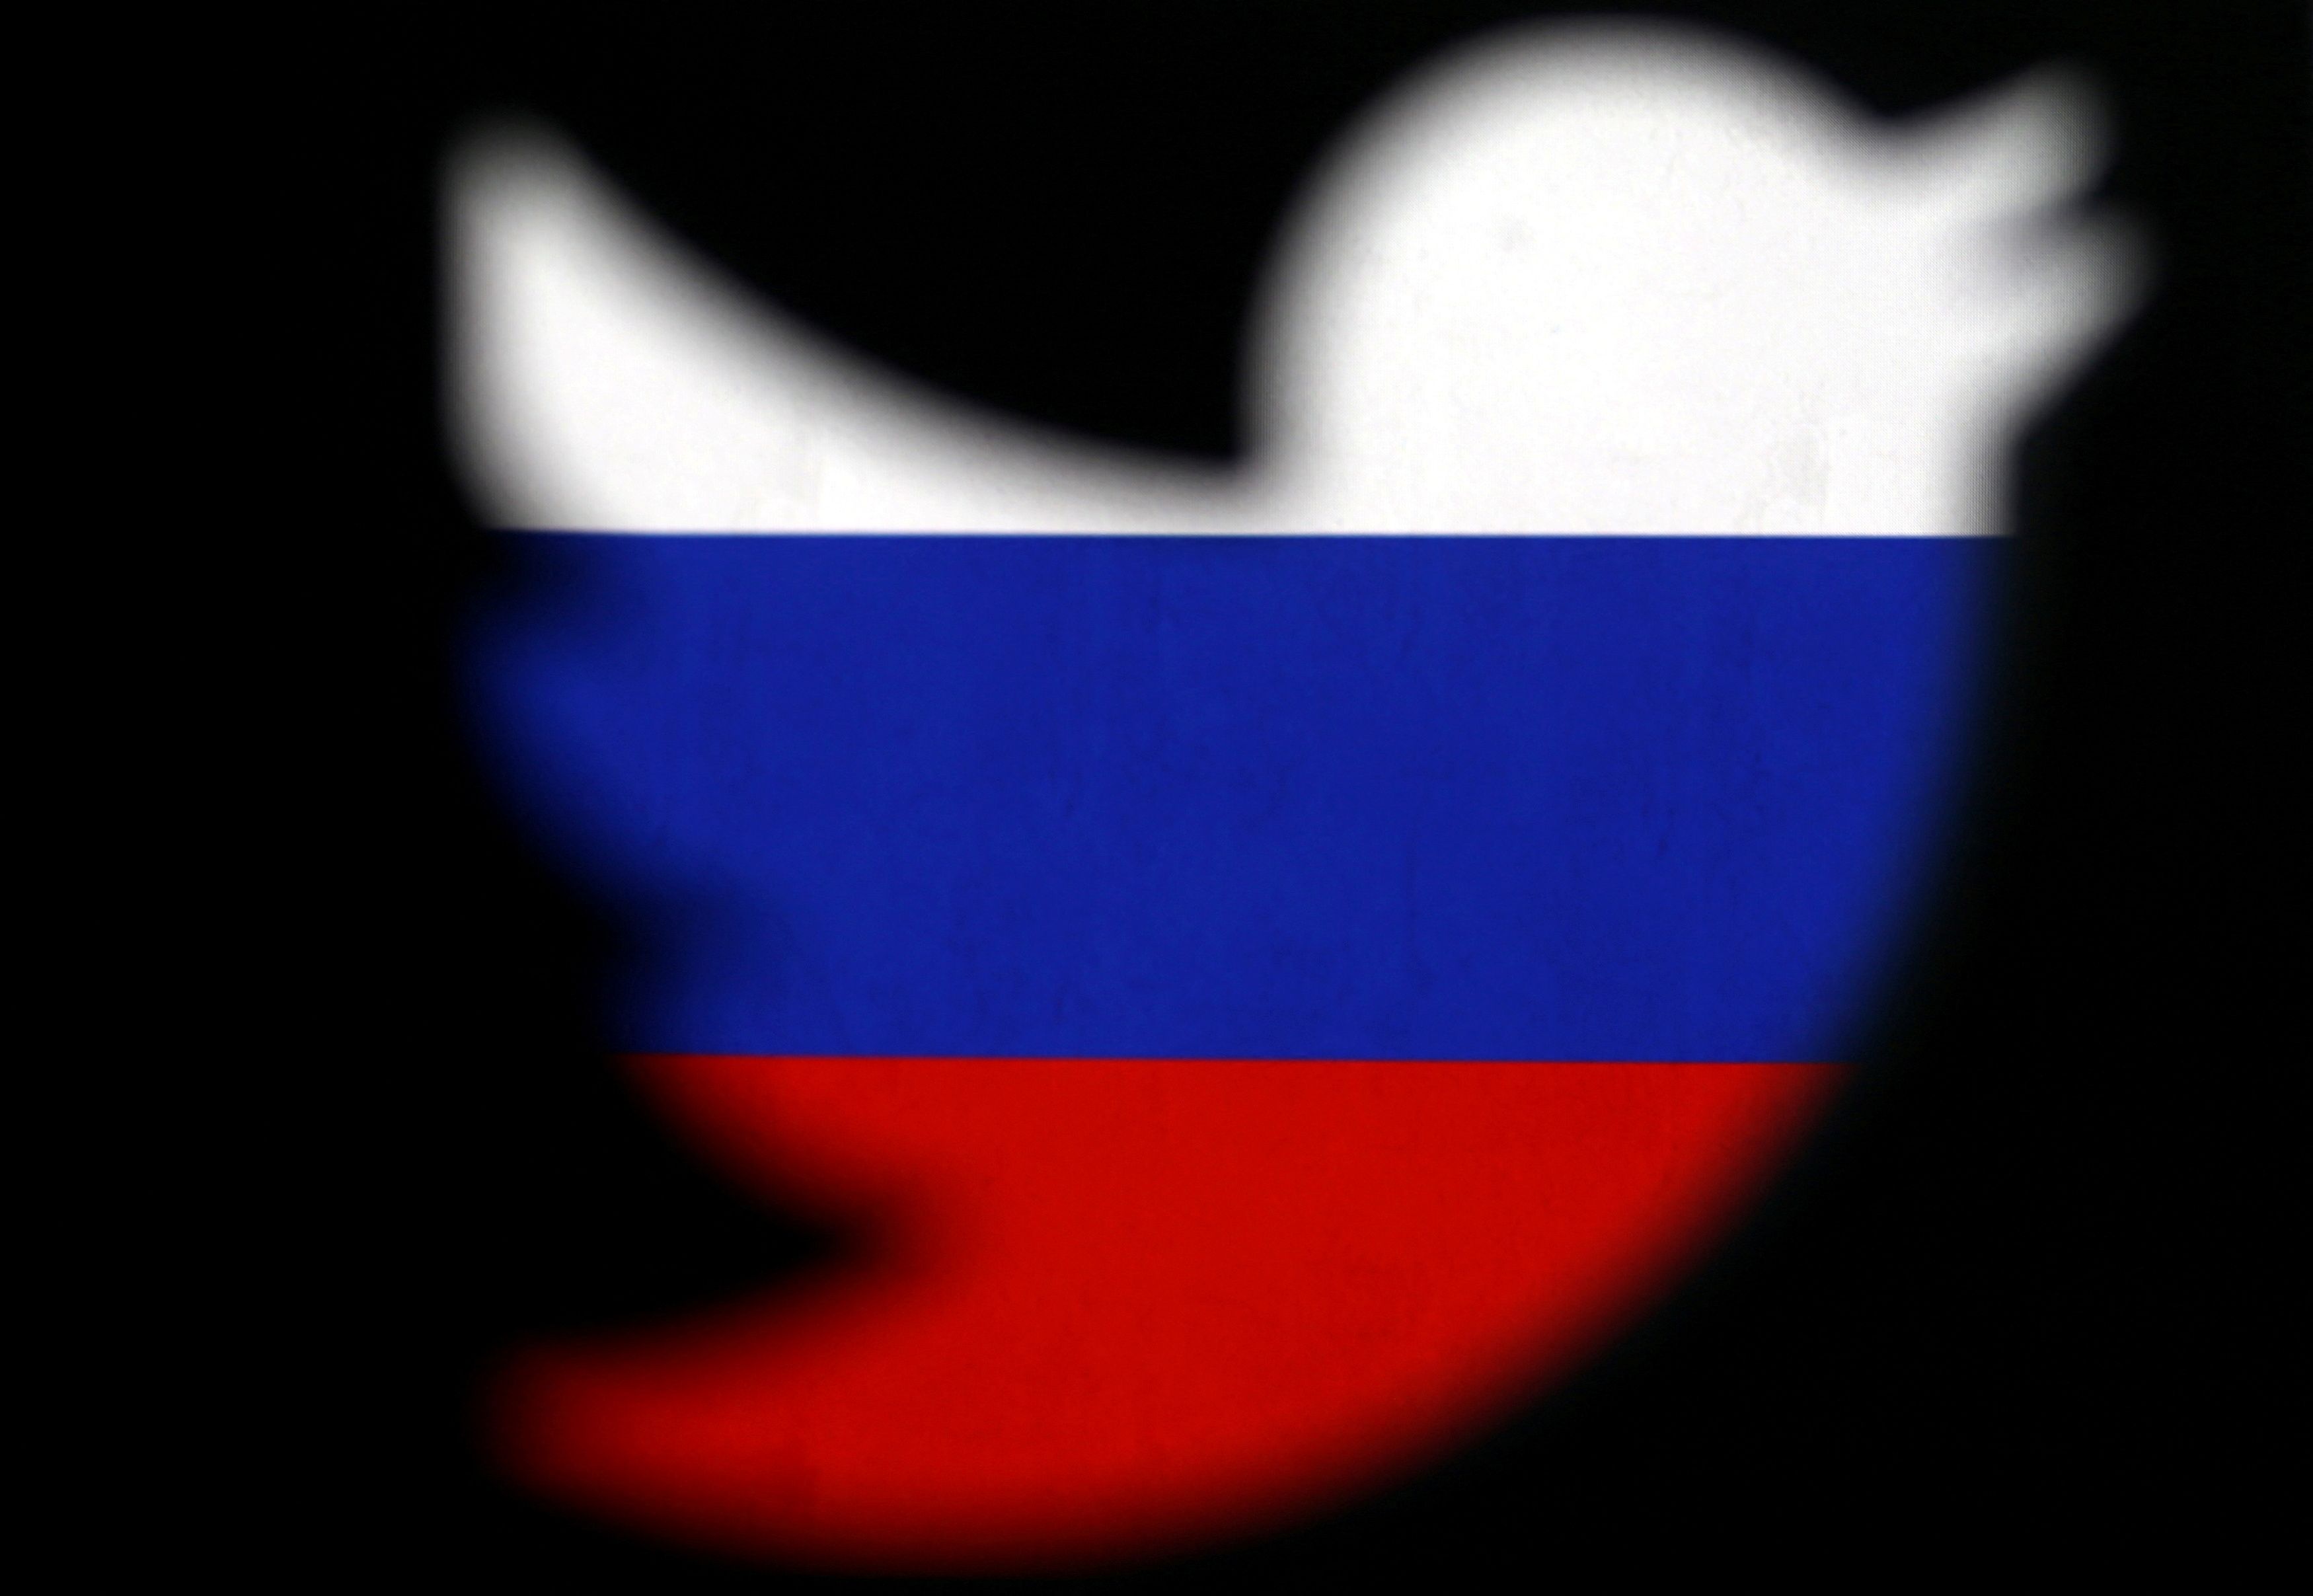 A 3D-printed Twitter logo displayed in front of Russian flag is seen in this illustration picture